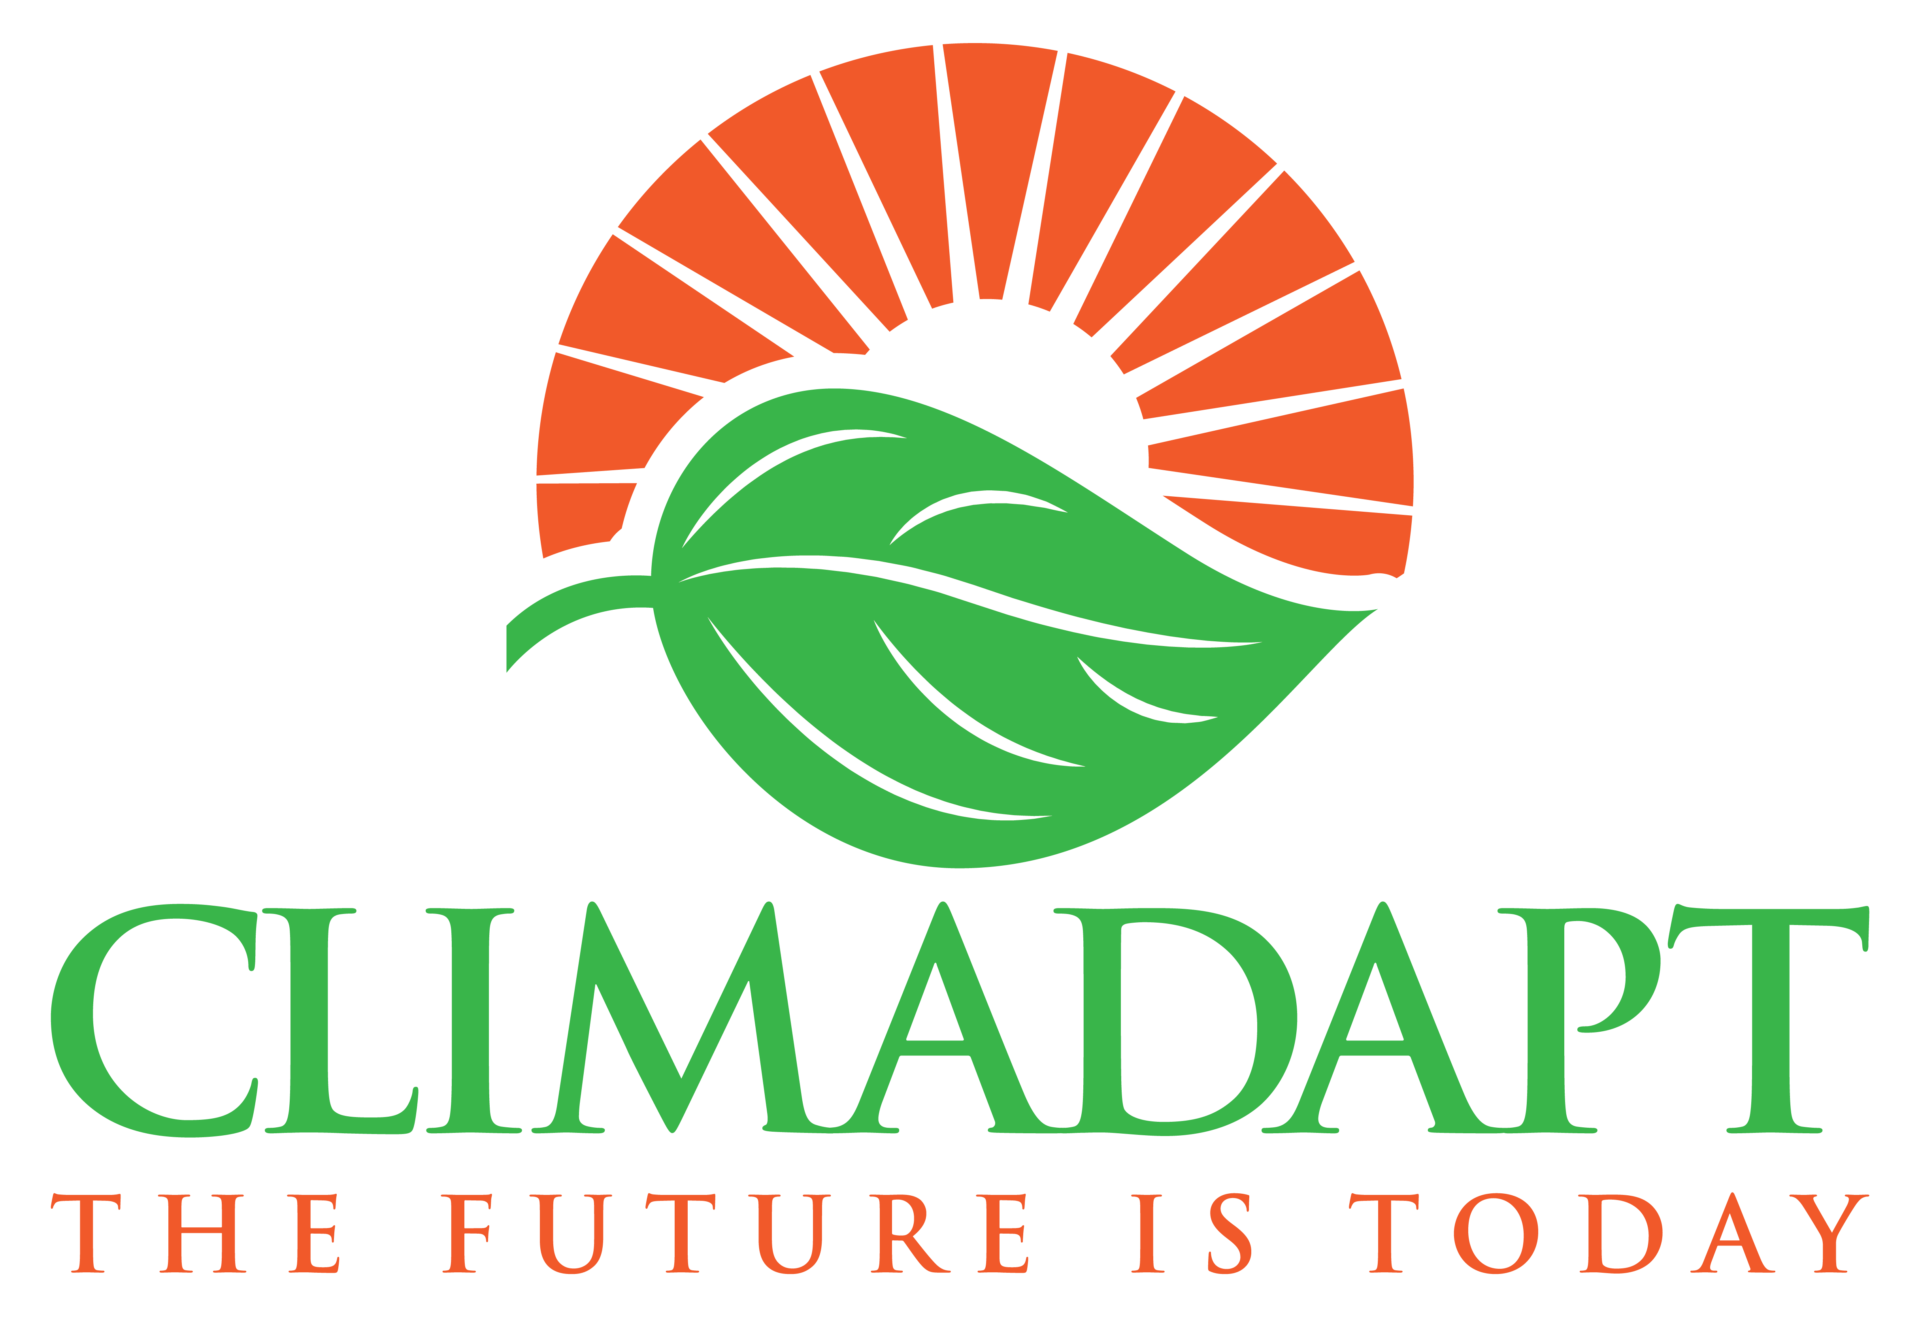 Climadapt logo is a green leaf with an orange sunset behind the leaf.